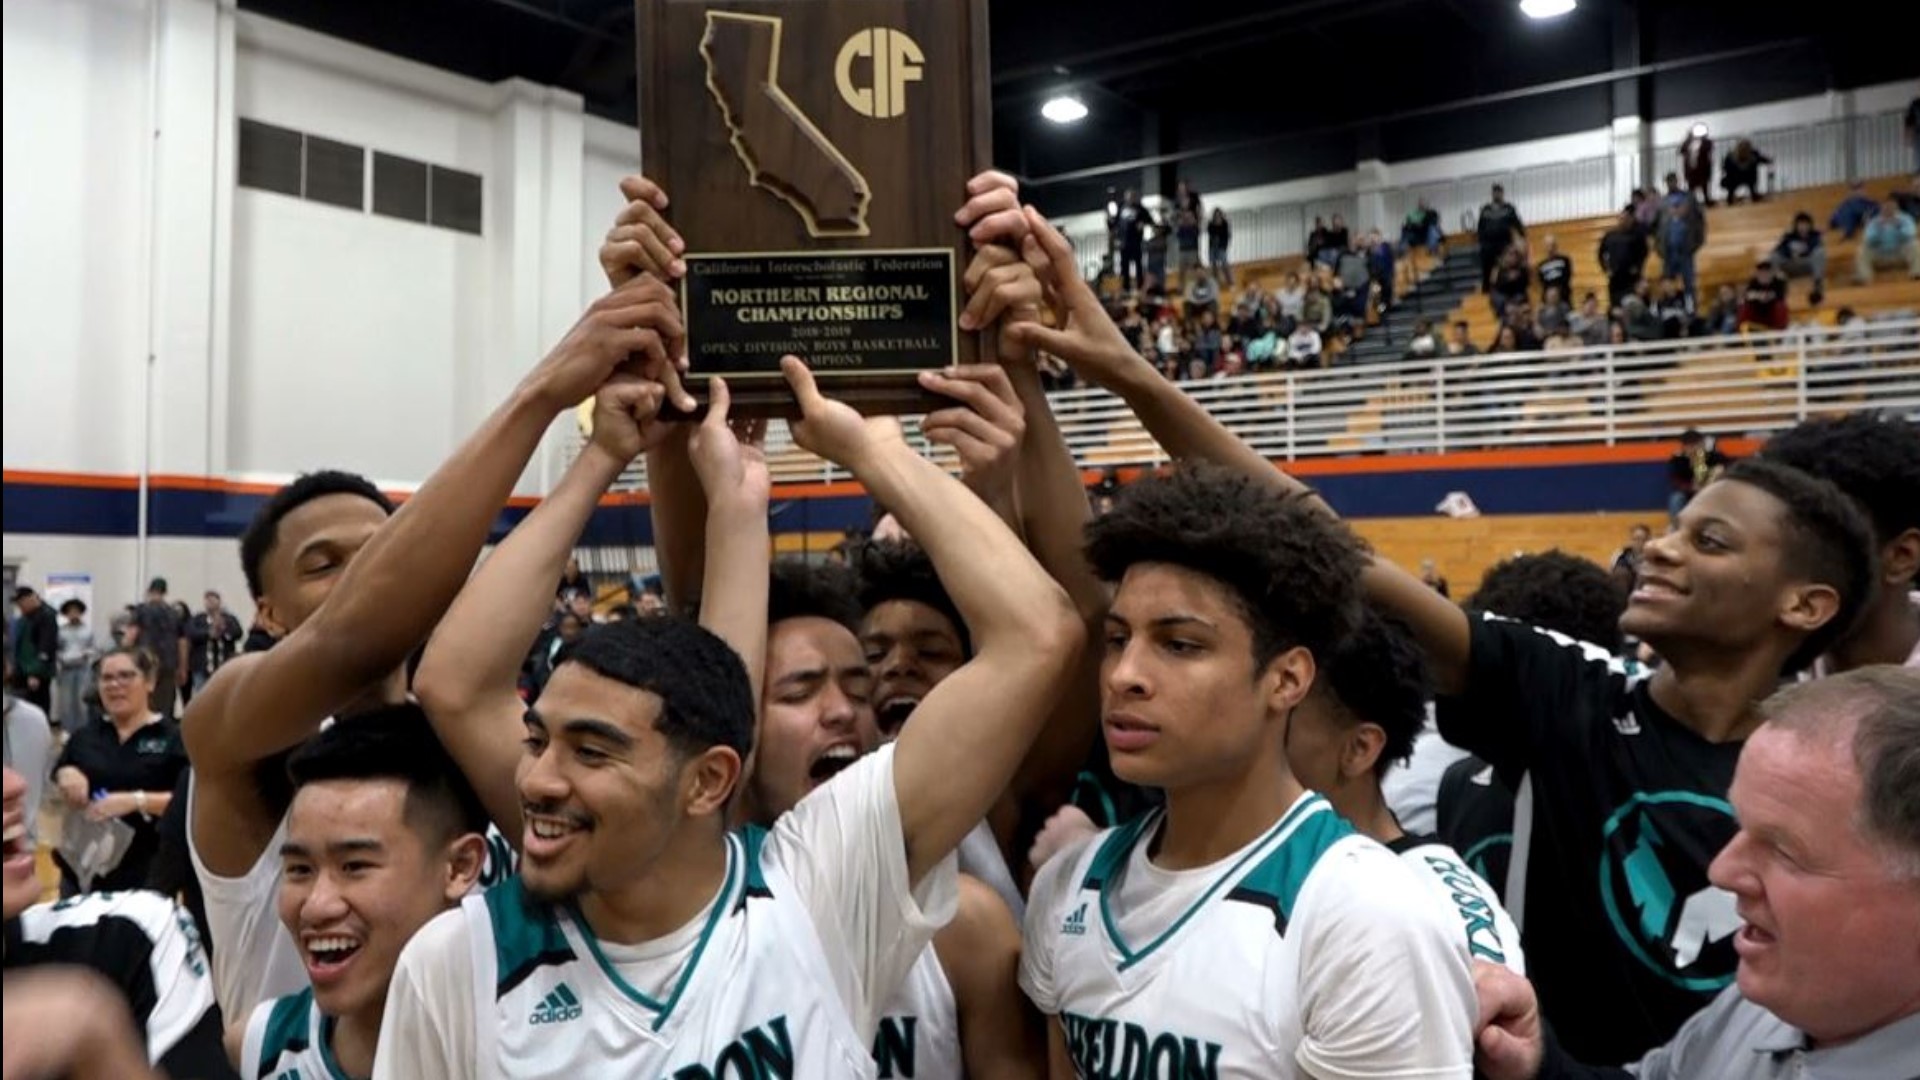 The Sheldon Huskies are returning to the CIF Open Division Boys State Championship earning a rematch with Sierra Canyon after defeating the Modesto Christian Crusaders 57-48 in the Northern California title game on Tuesday.